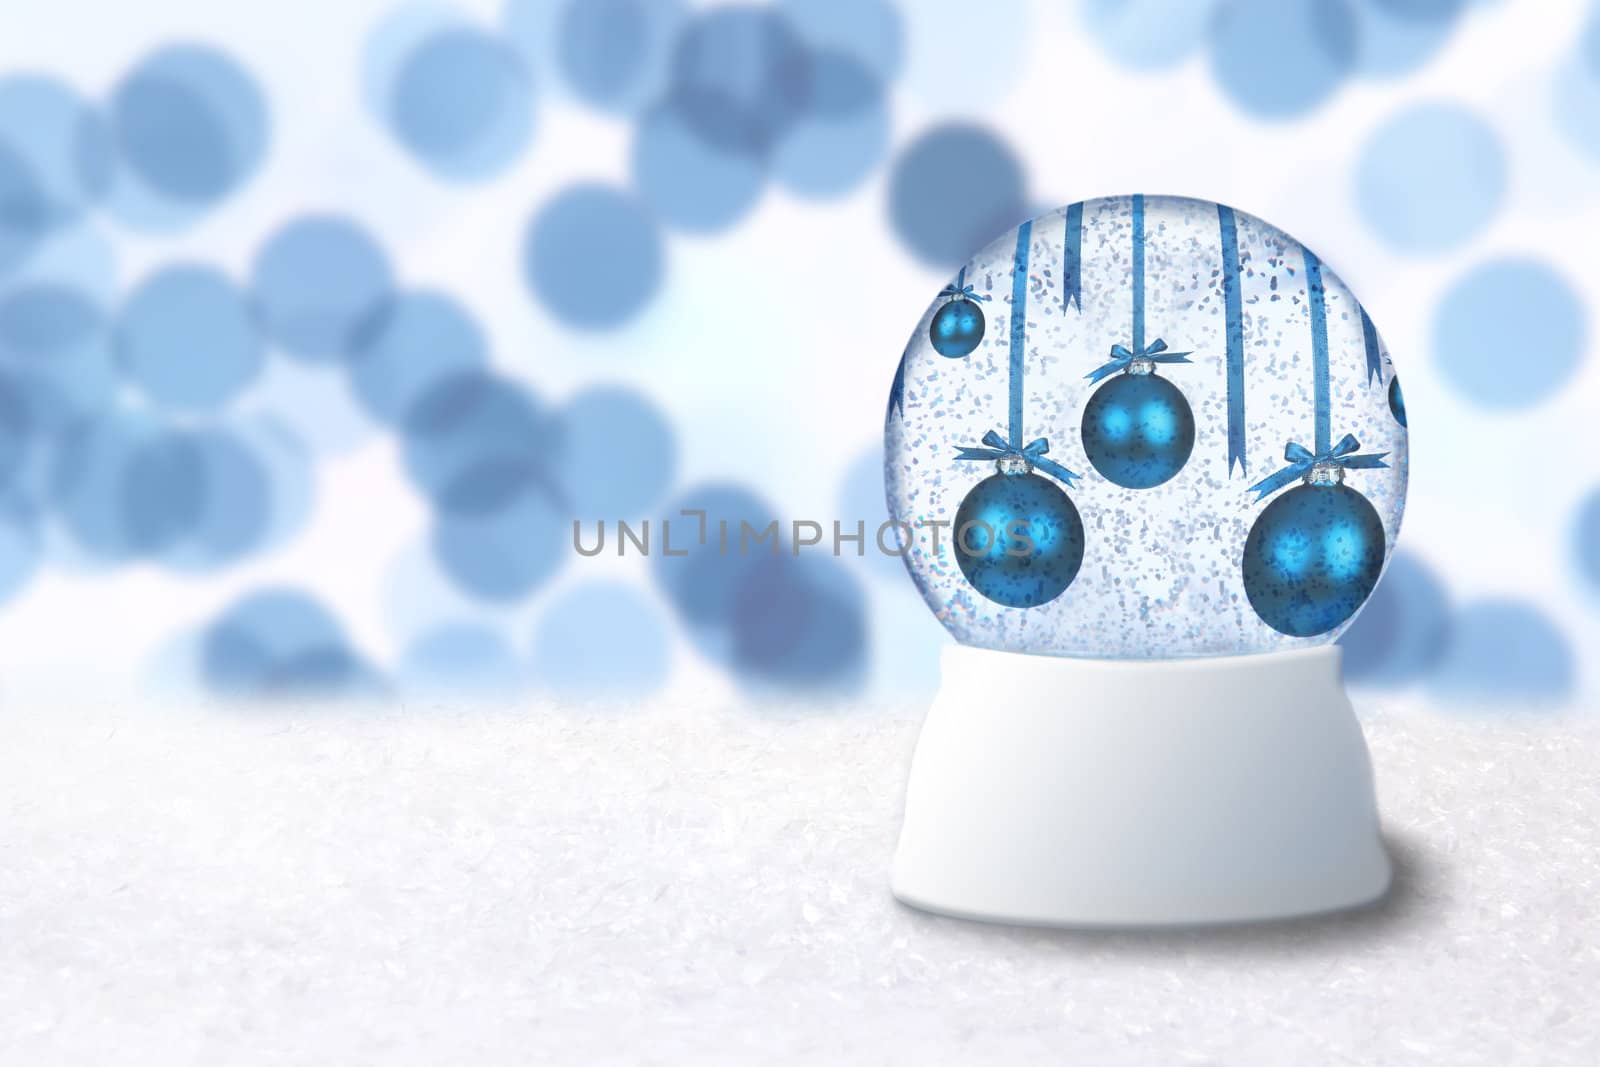 Christmas Snow Globe With Blue Holiday Bulbs on Abstract Background. Insert Your Own Image or Text